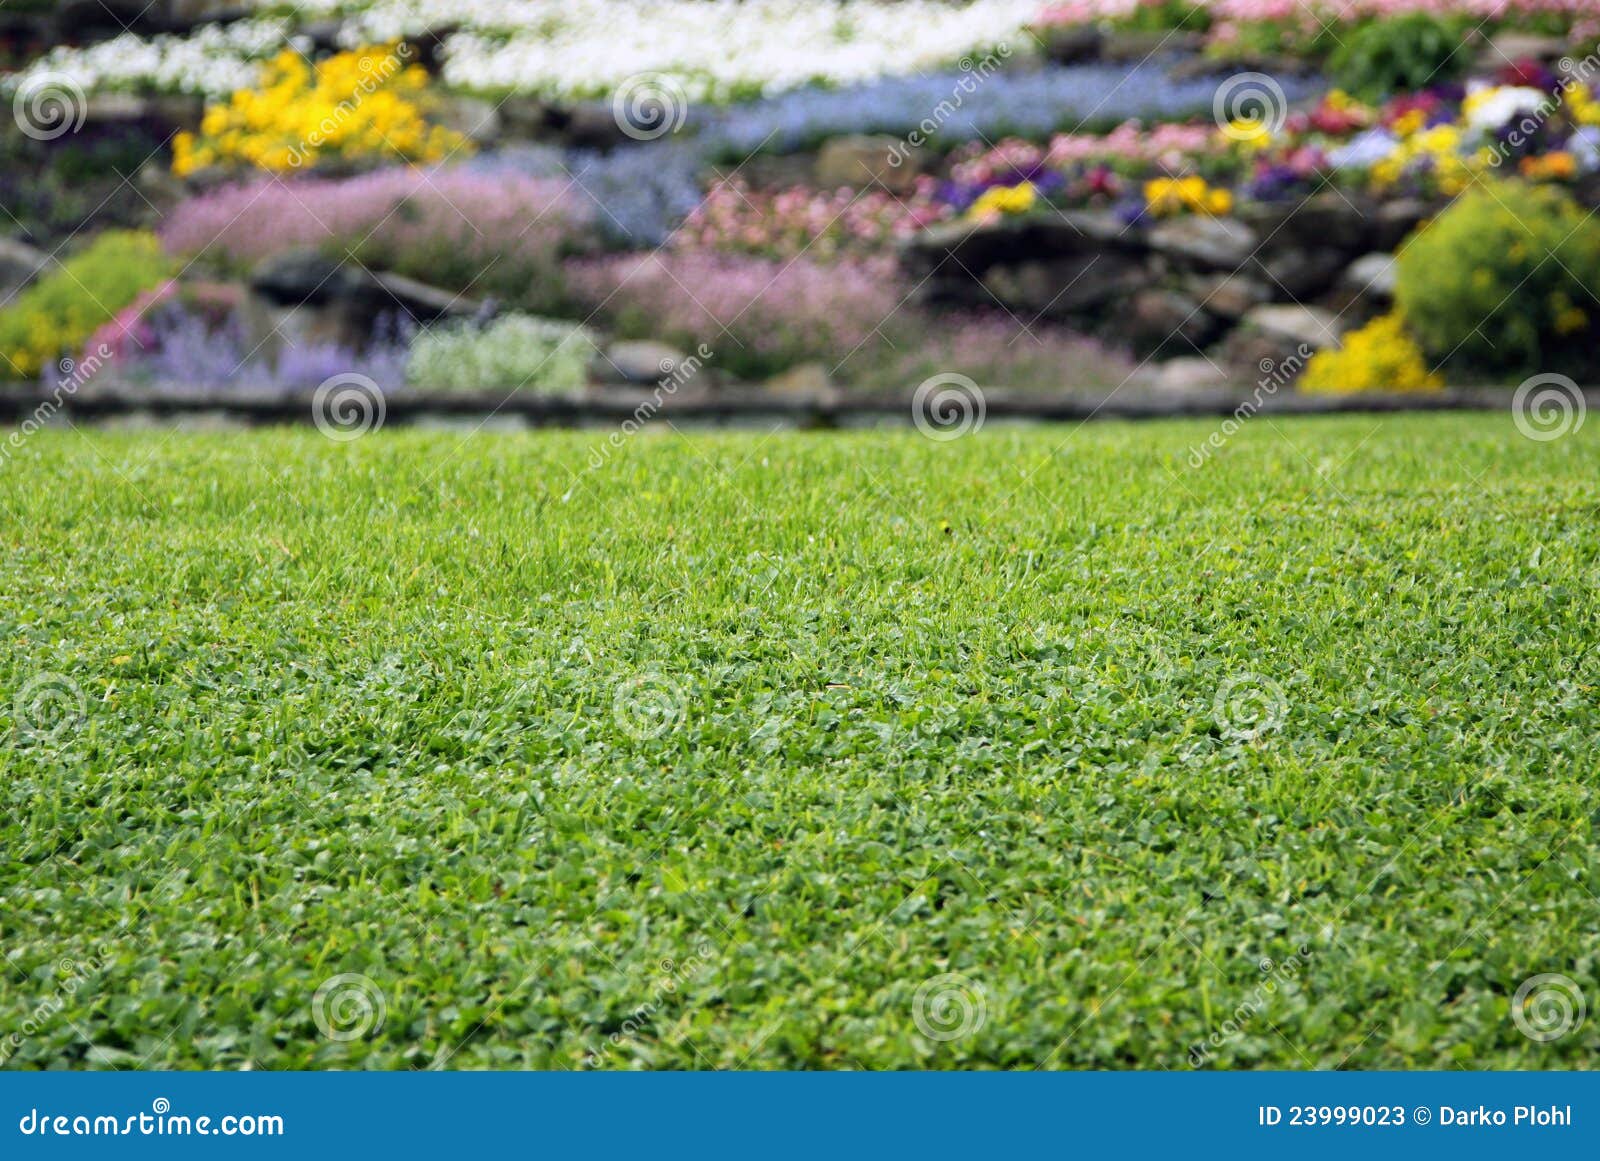 lawn with flowers